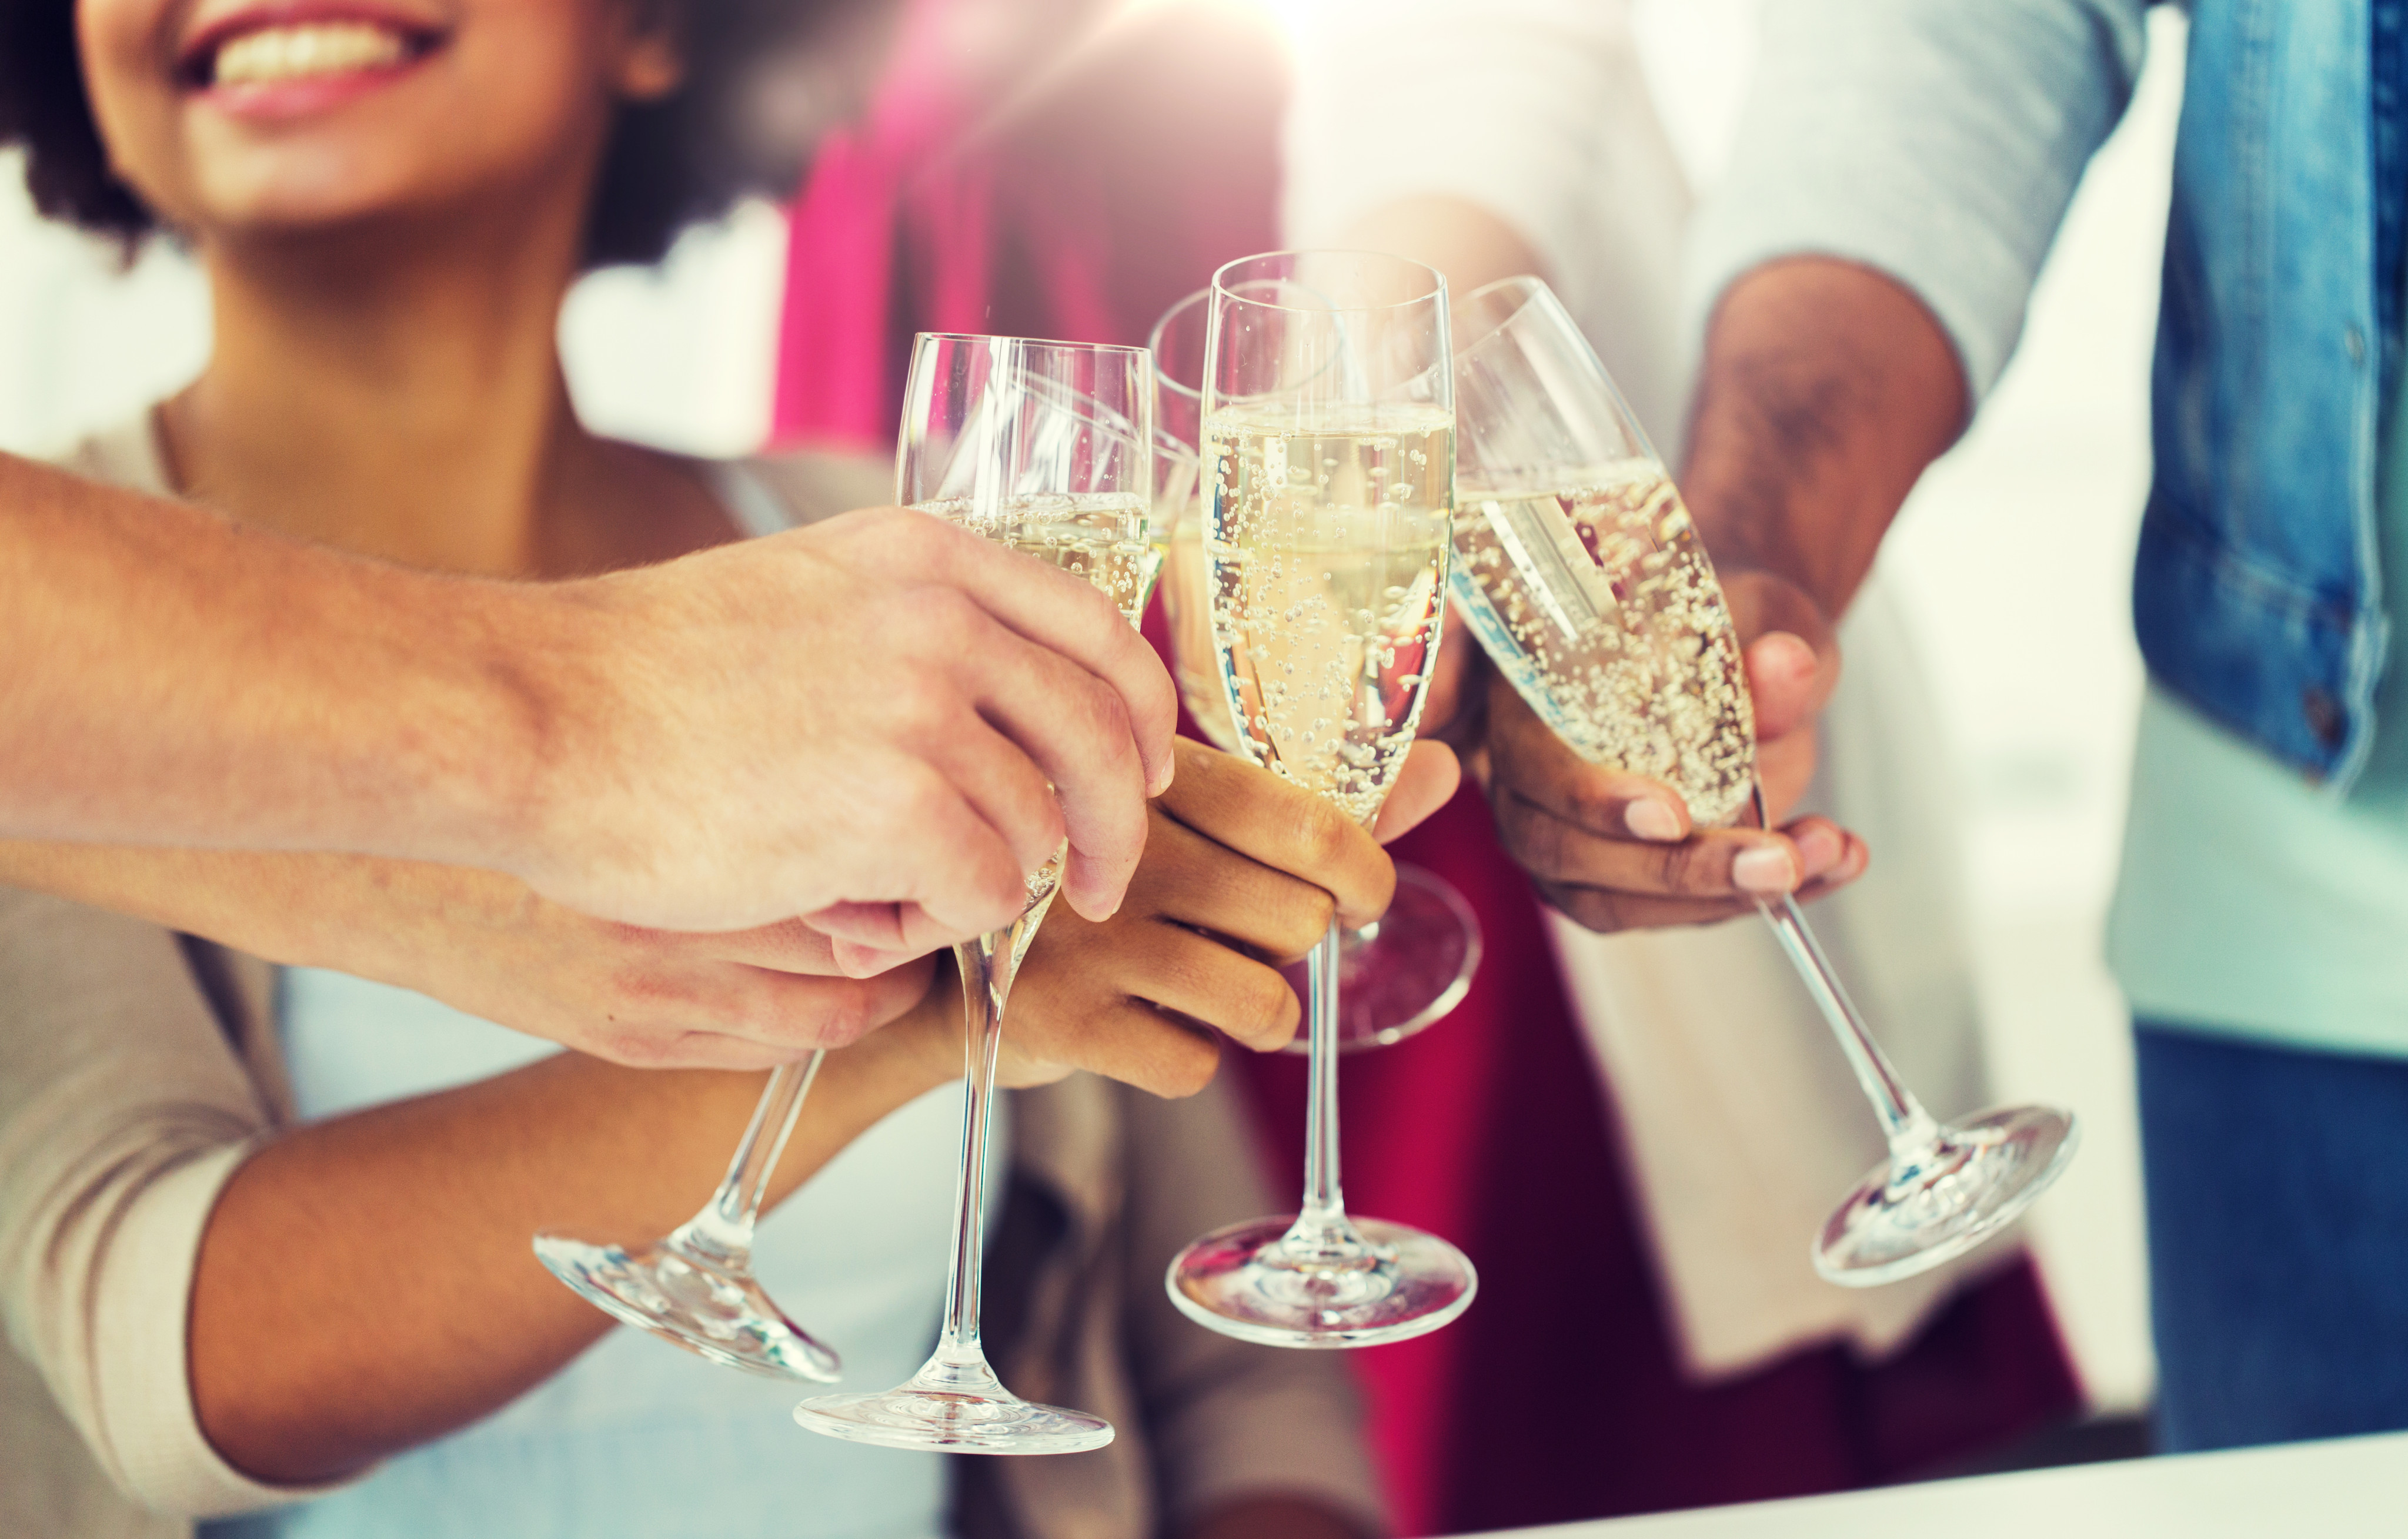 Sparkling wine will be drunk widely over the holiday period, but champagne is expensive. We pick some alternatives that won’t break the bank. Photo: Shutterstock